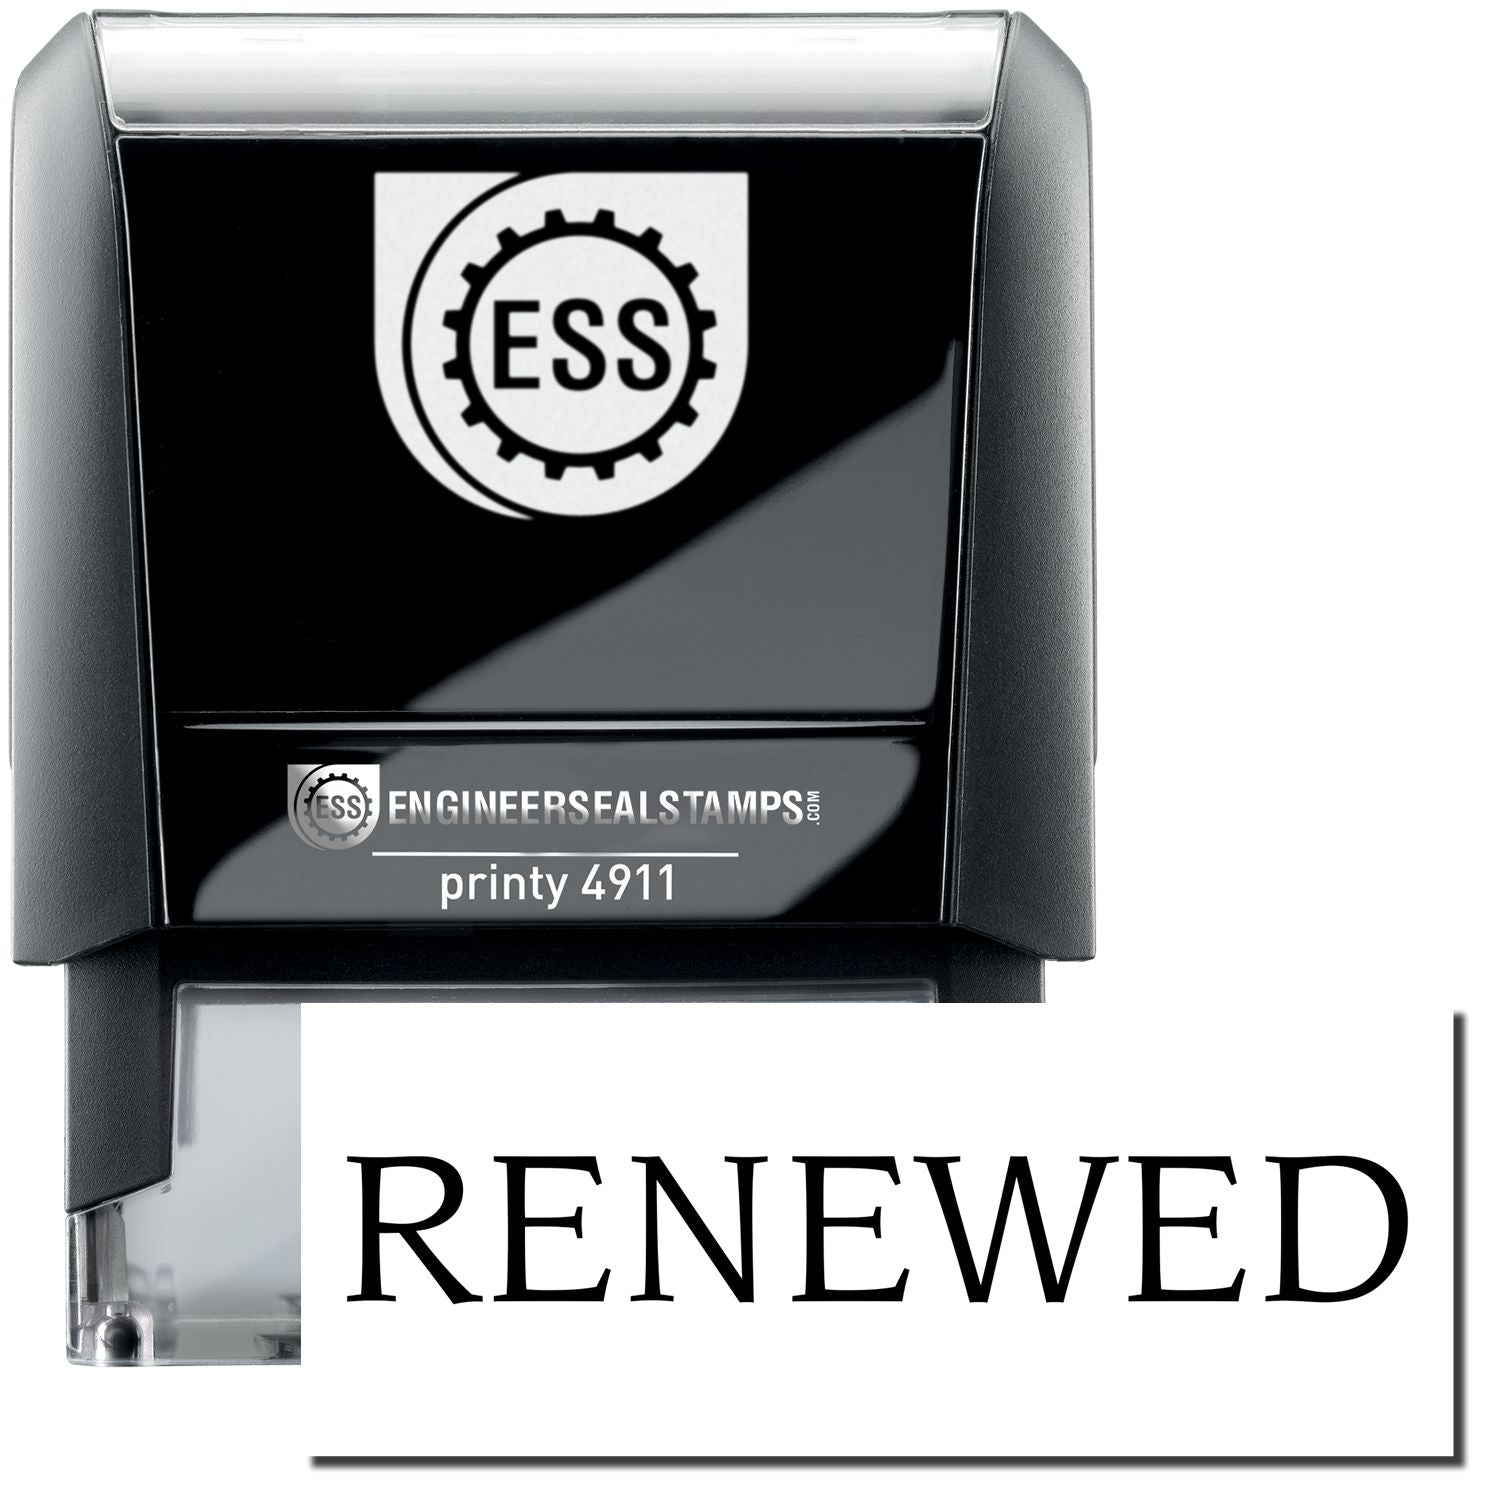 A self-inking stamp with a stamped image showing how the text "RENEWED" is displayed after stamping.